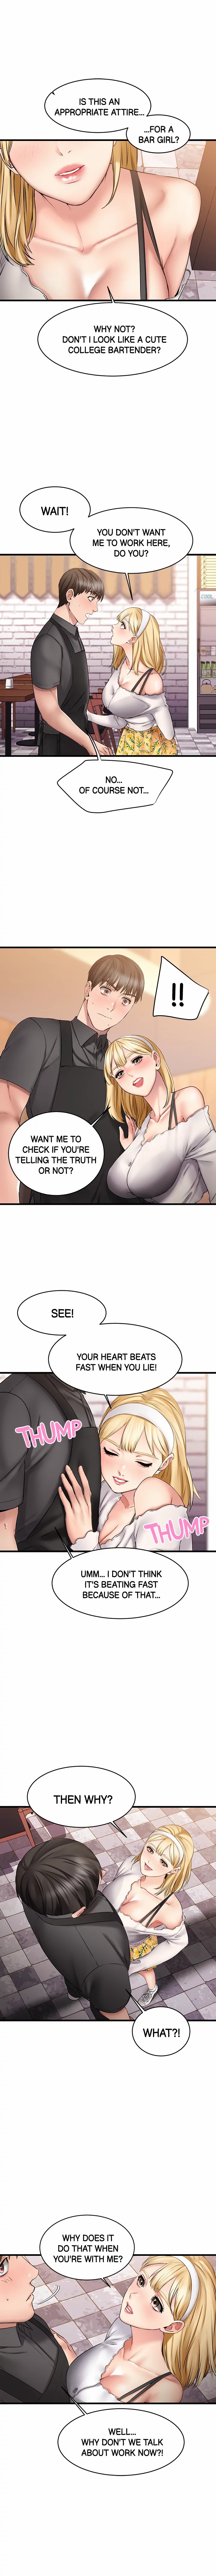 My Female Friend Who Crossed The Line - Chapter 8 Page 6